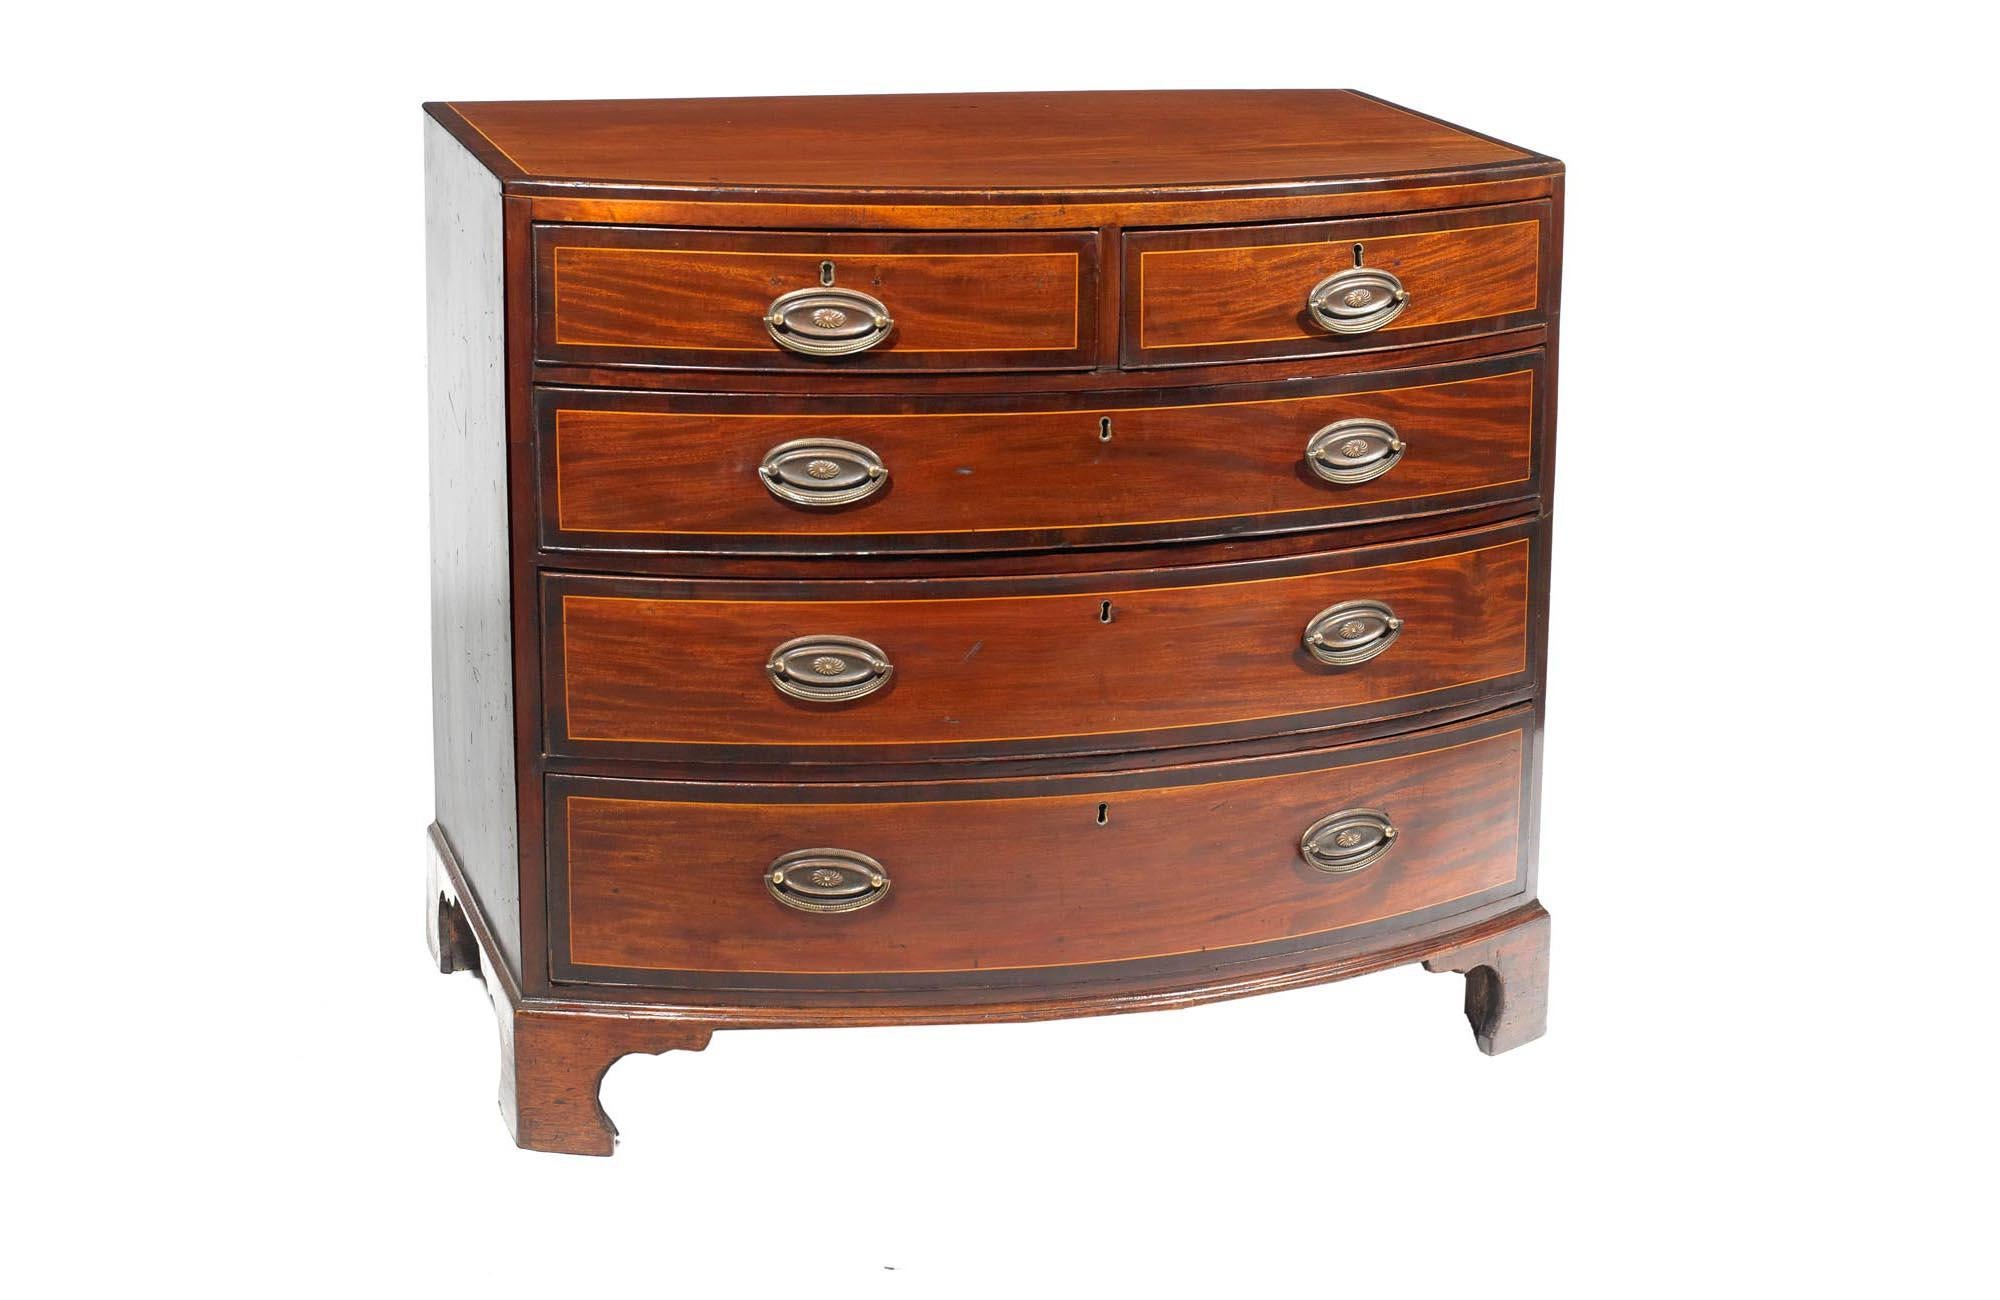 Irish Early 19th Century Bowfront Chest of Drawers after Thomas Sheraton For Sale